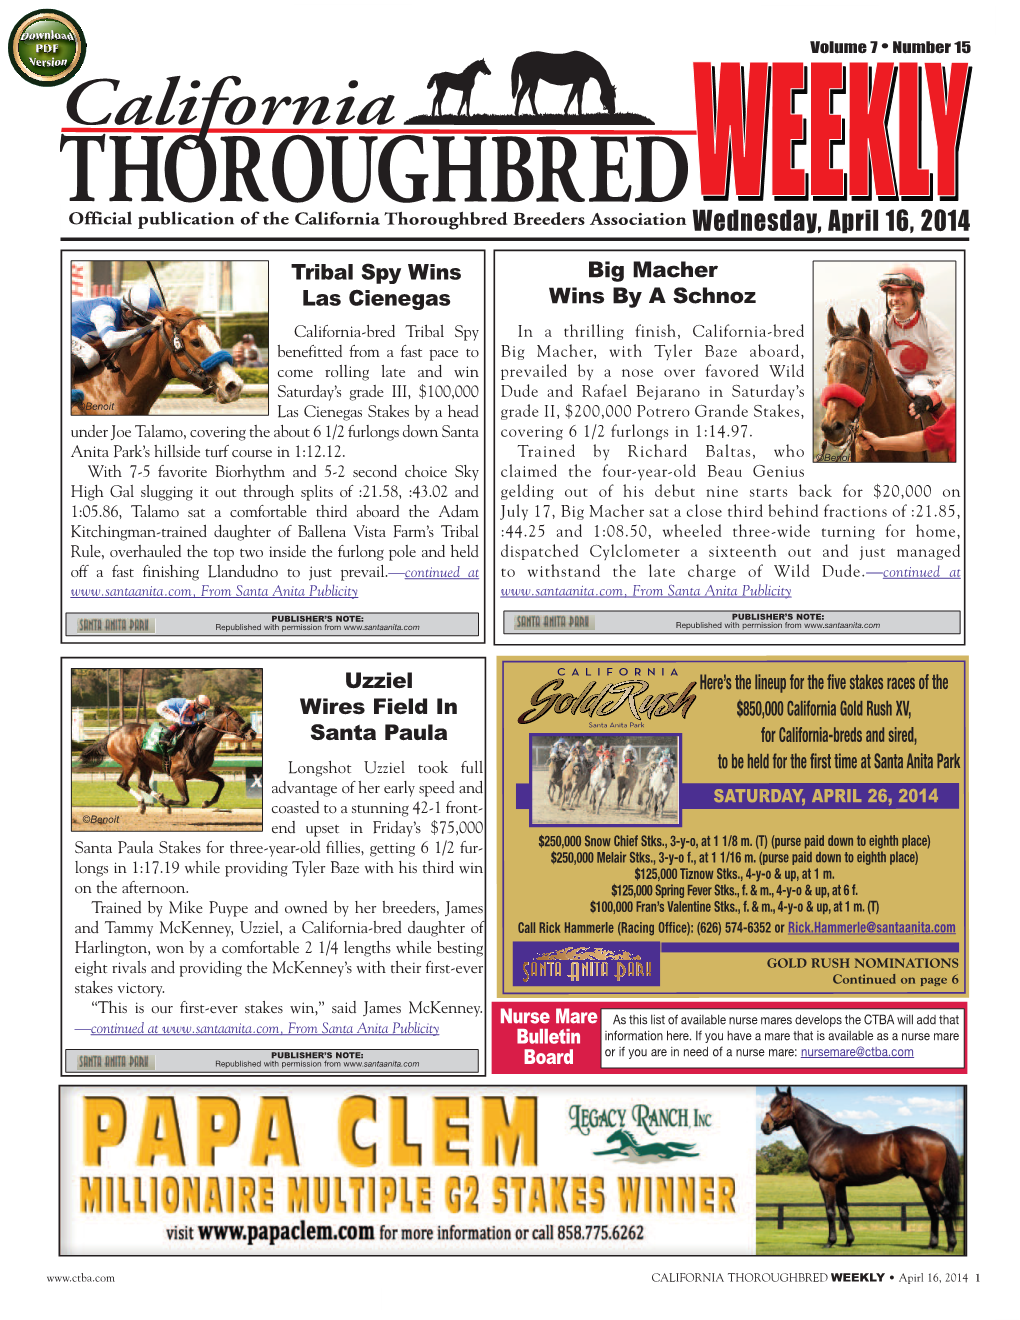 California Thoroughbred Weekly for Tuesday 4-15-2014